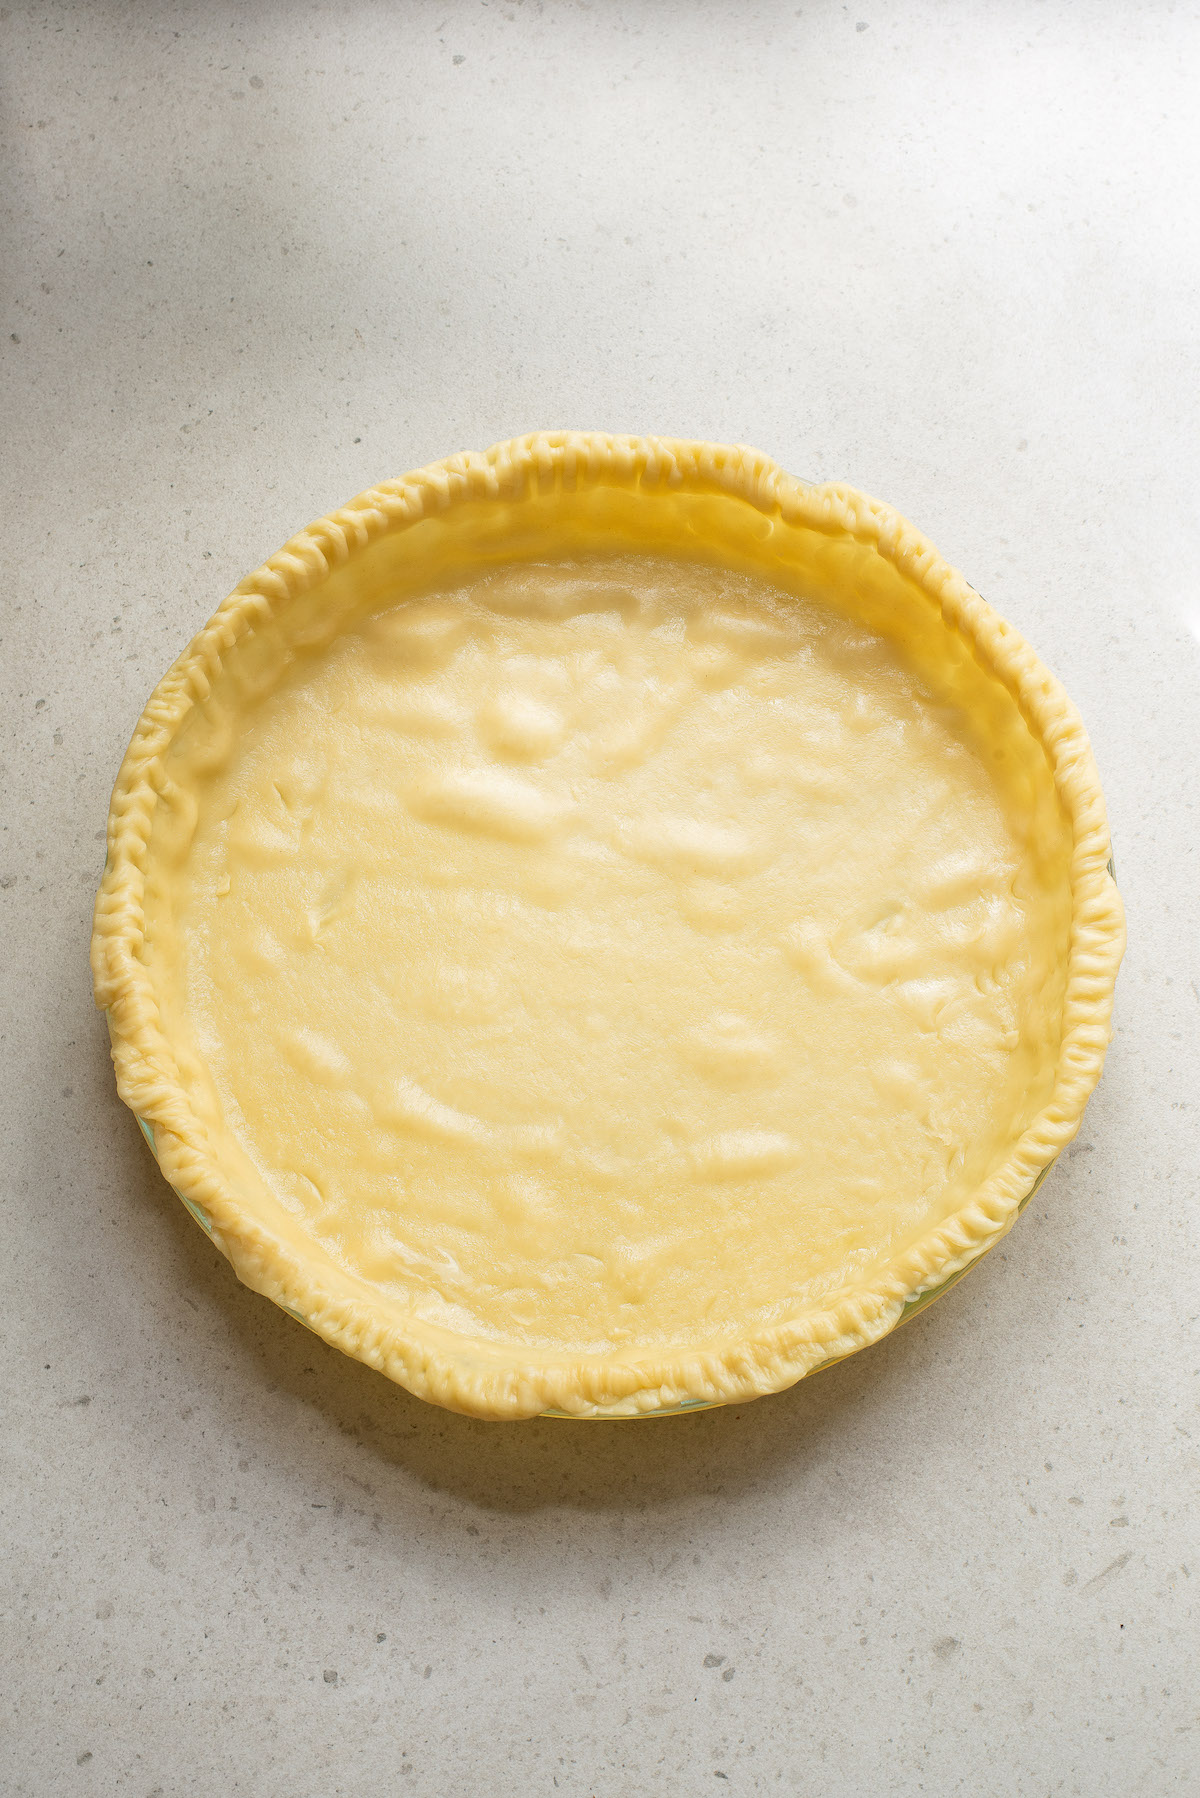 the formed pie crust in a 9-inch pie plate